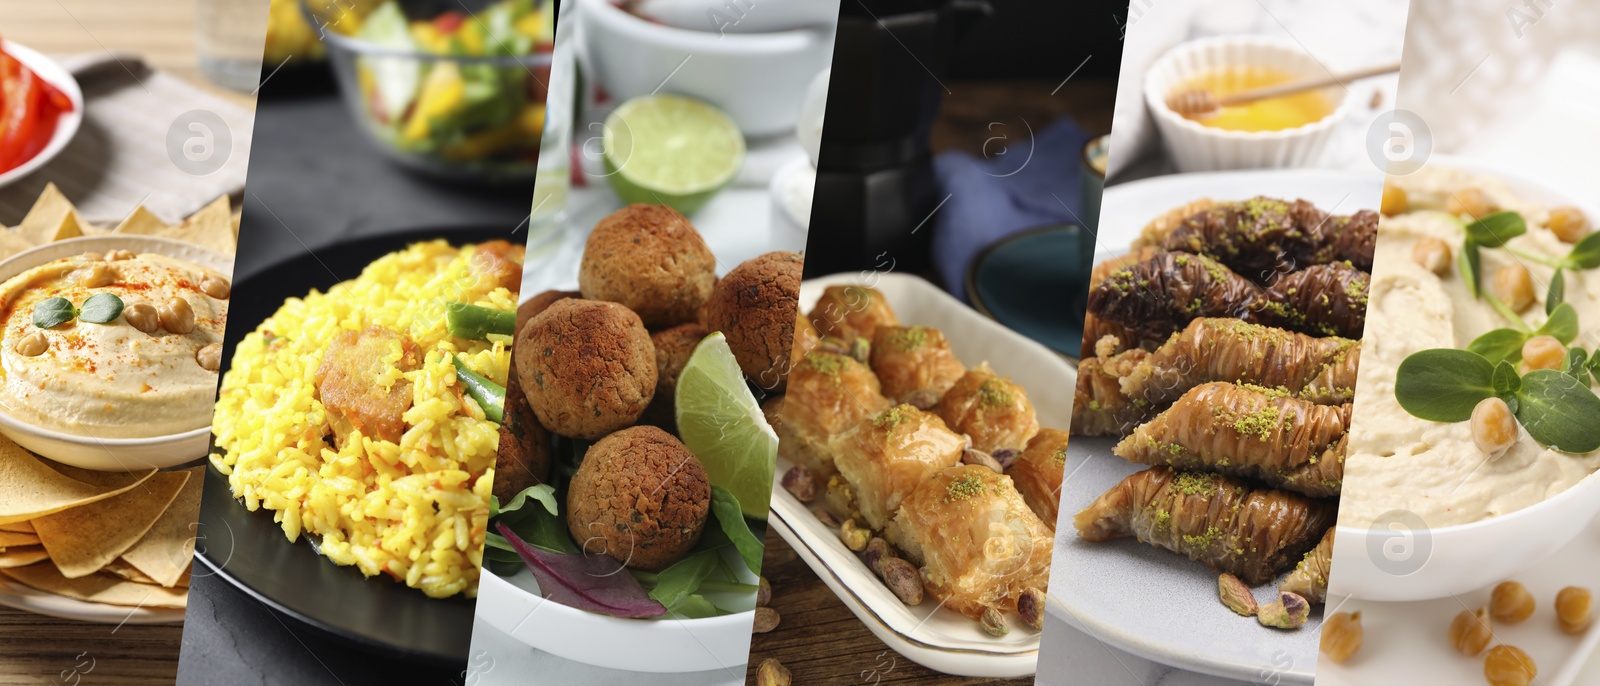 Image of Different tasty Middle Eastern dishes. Collage of hummus, pilaf, falafel balls and baklava